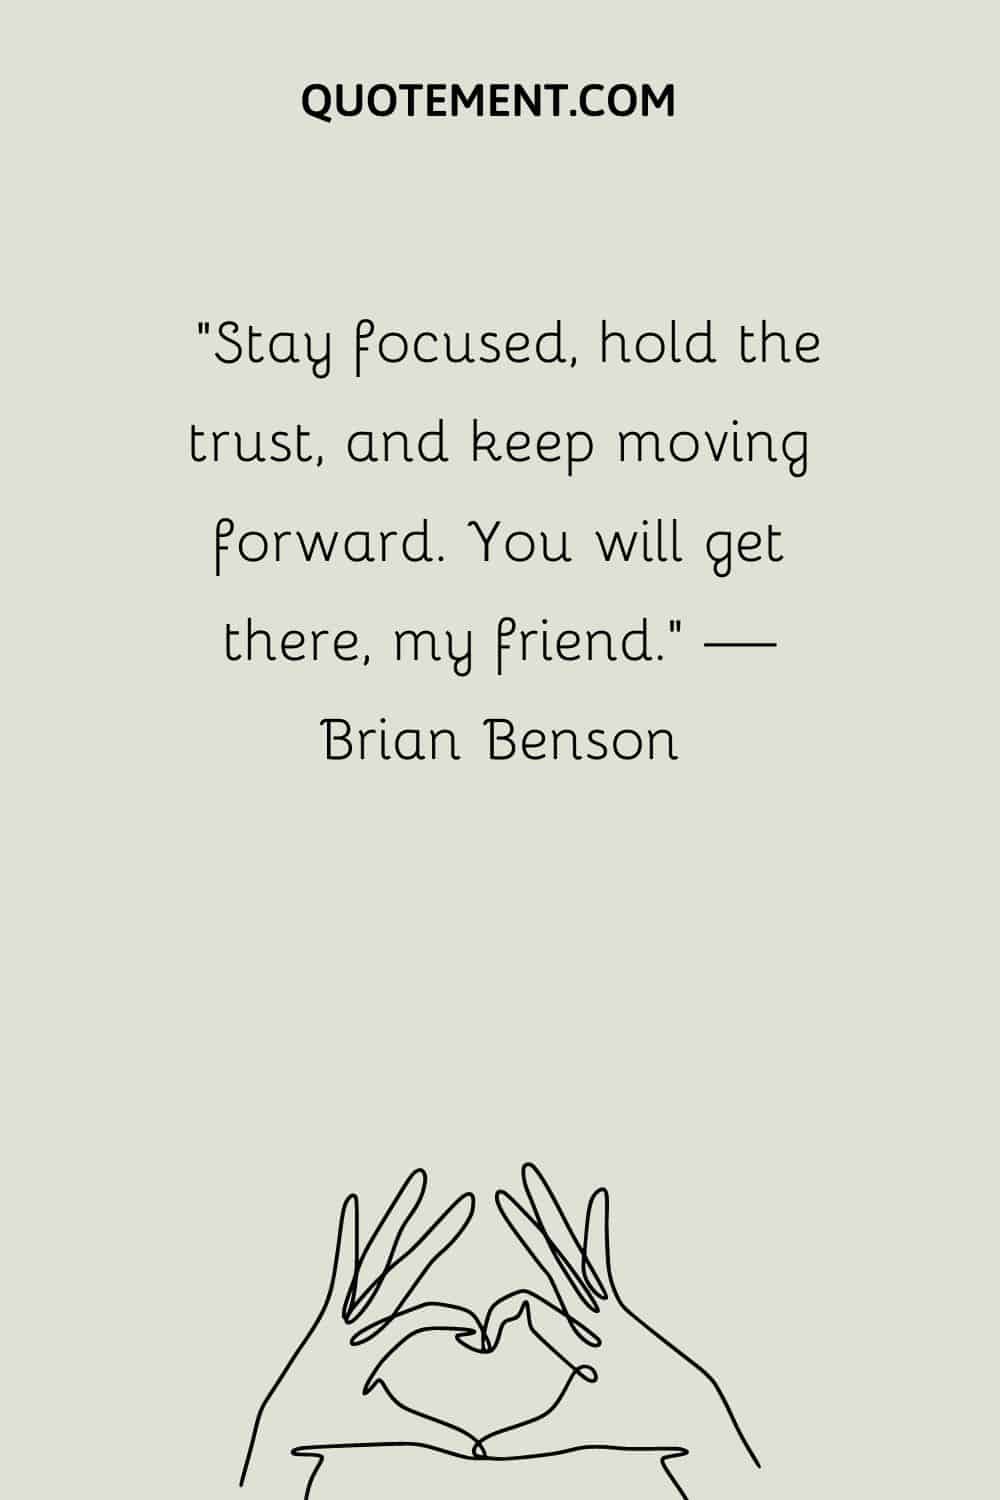 “Stay focused, hold the trust, and keep moving forward. You will get there, my friend.” — Brian Benson